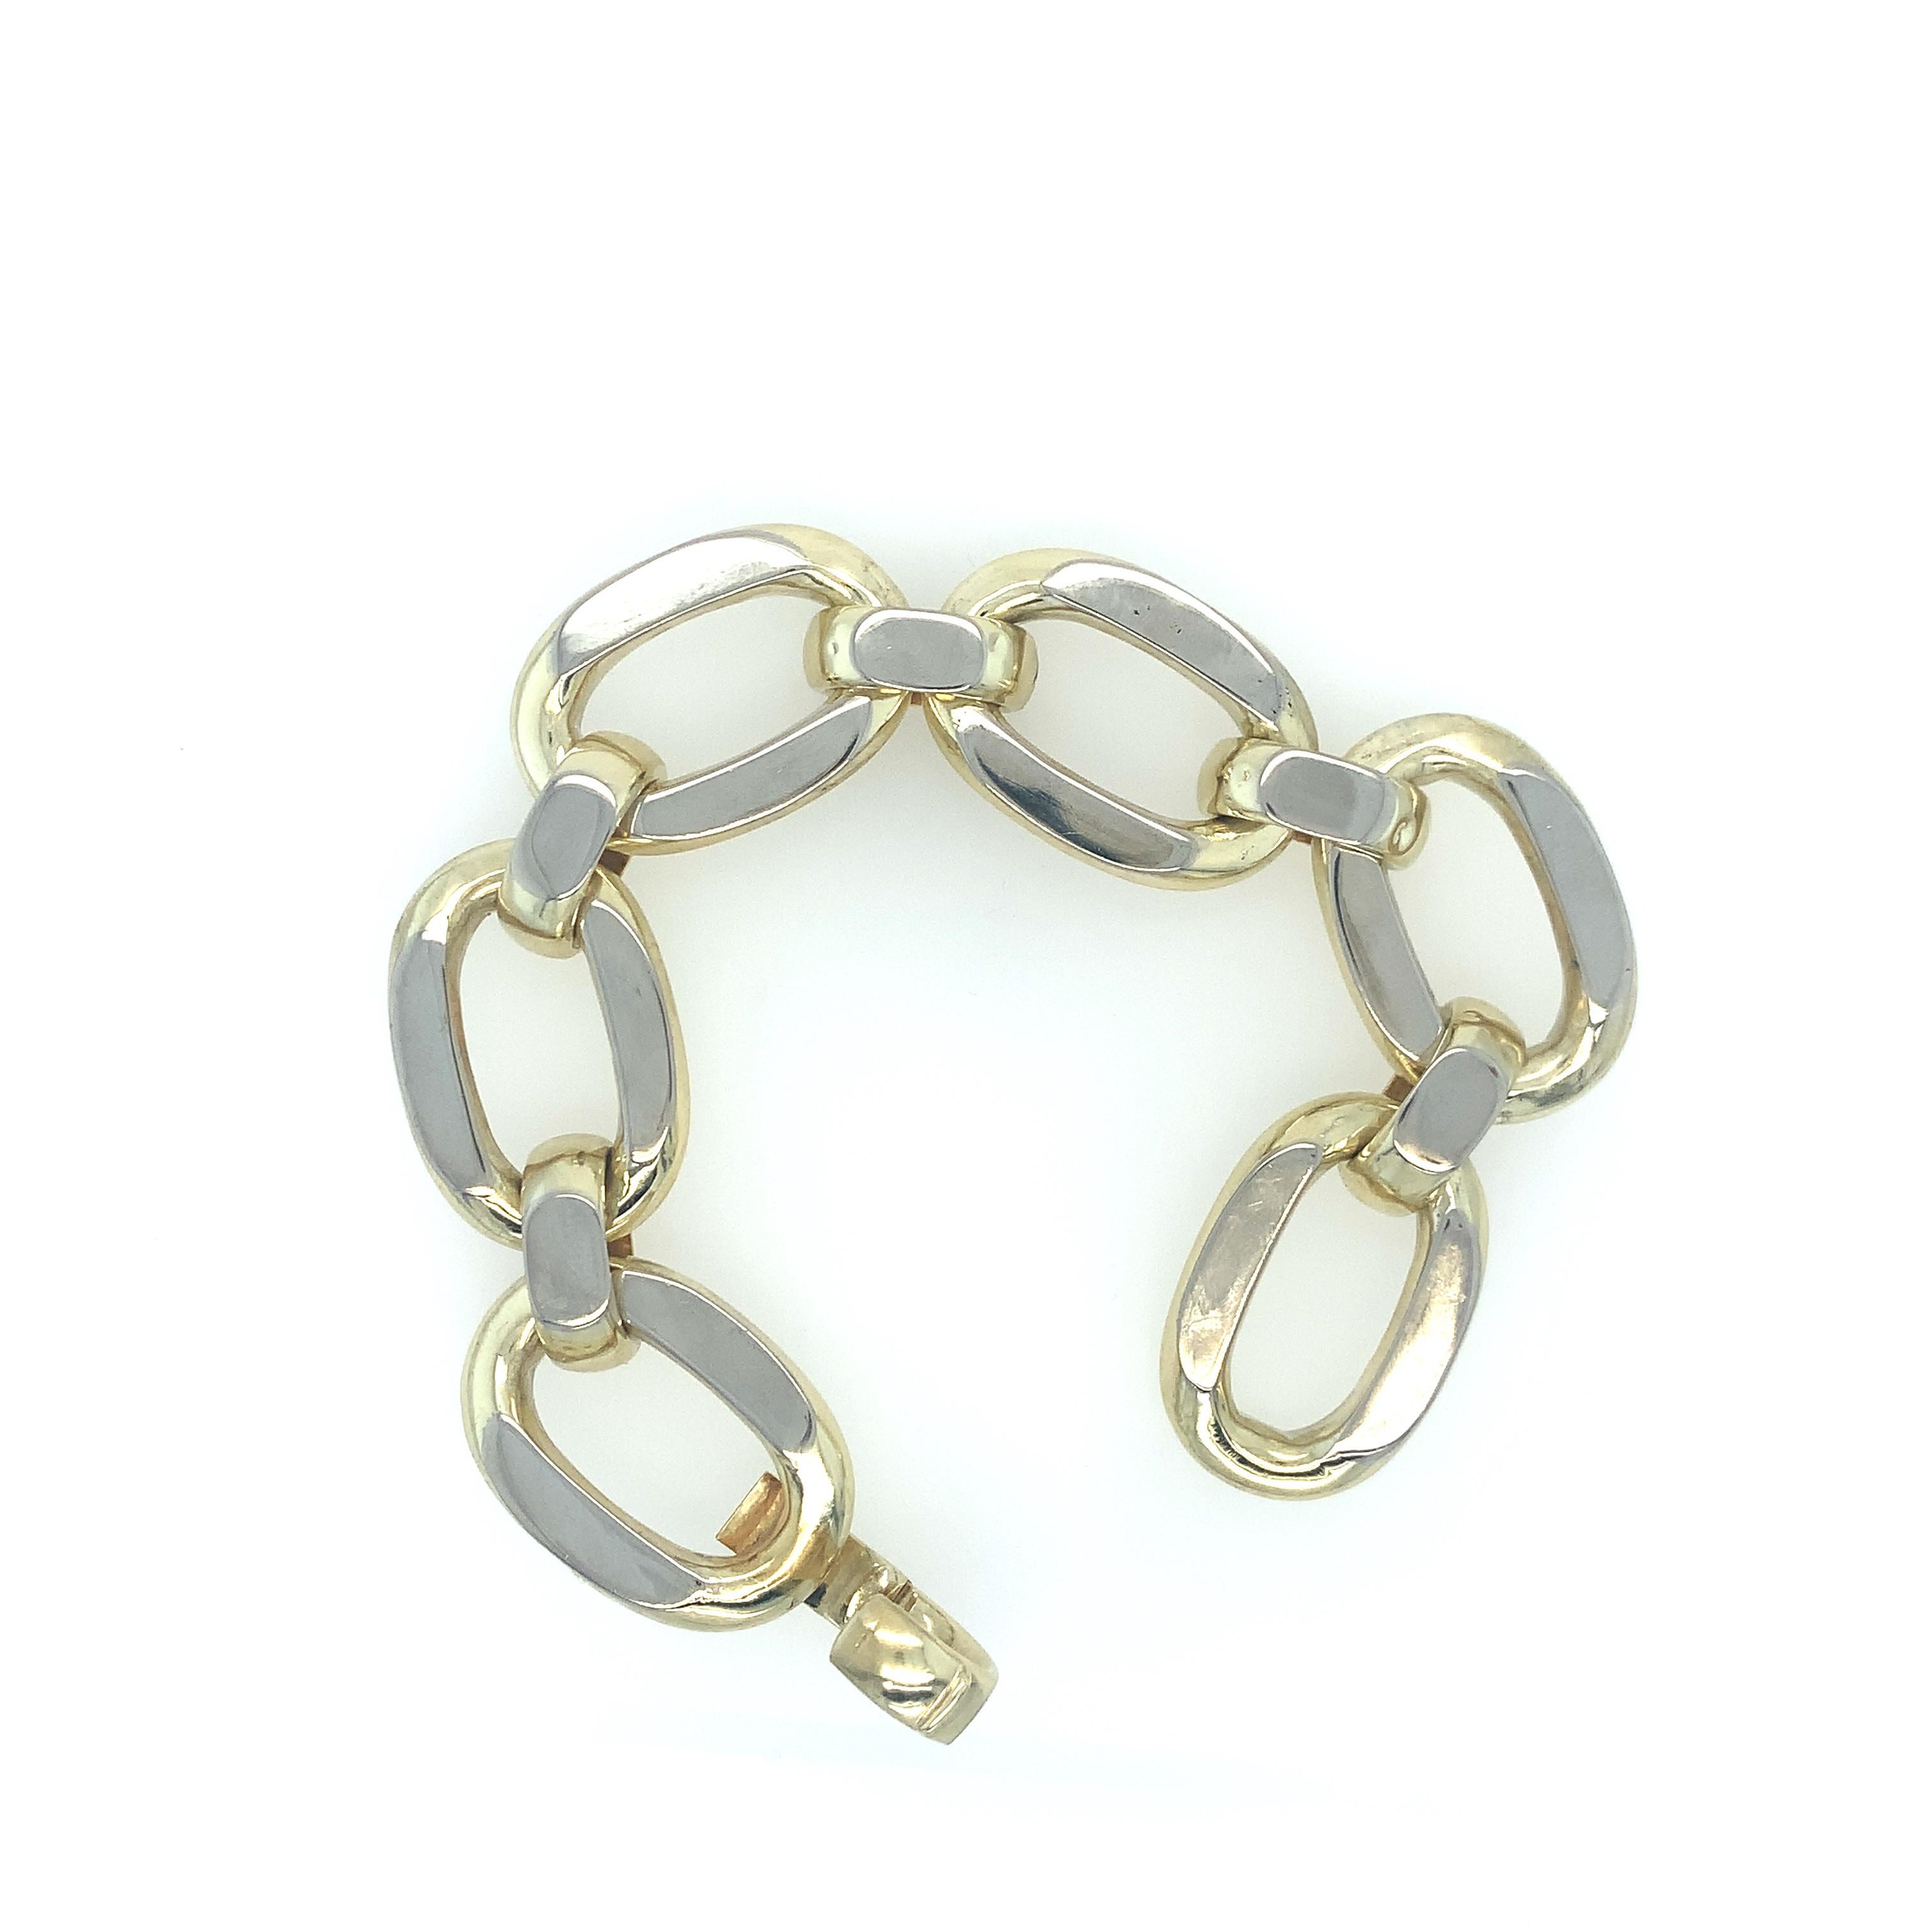 A vintage 14K two tone chain link bracelet comprised of (6) six large oval links joined with smaller domed links with flat polished surfaces. It is finished with an integrated hinged dome clasp – created by UnoAErre, an accomplished Italian jewelry